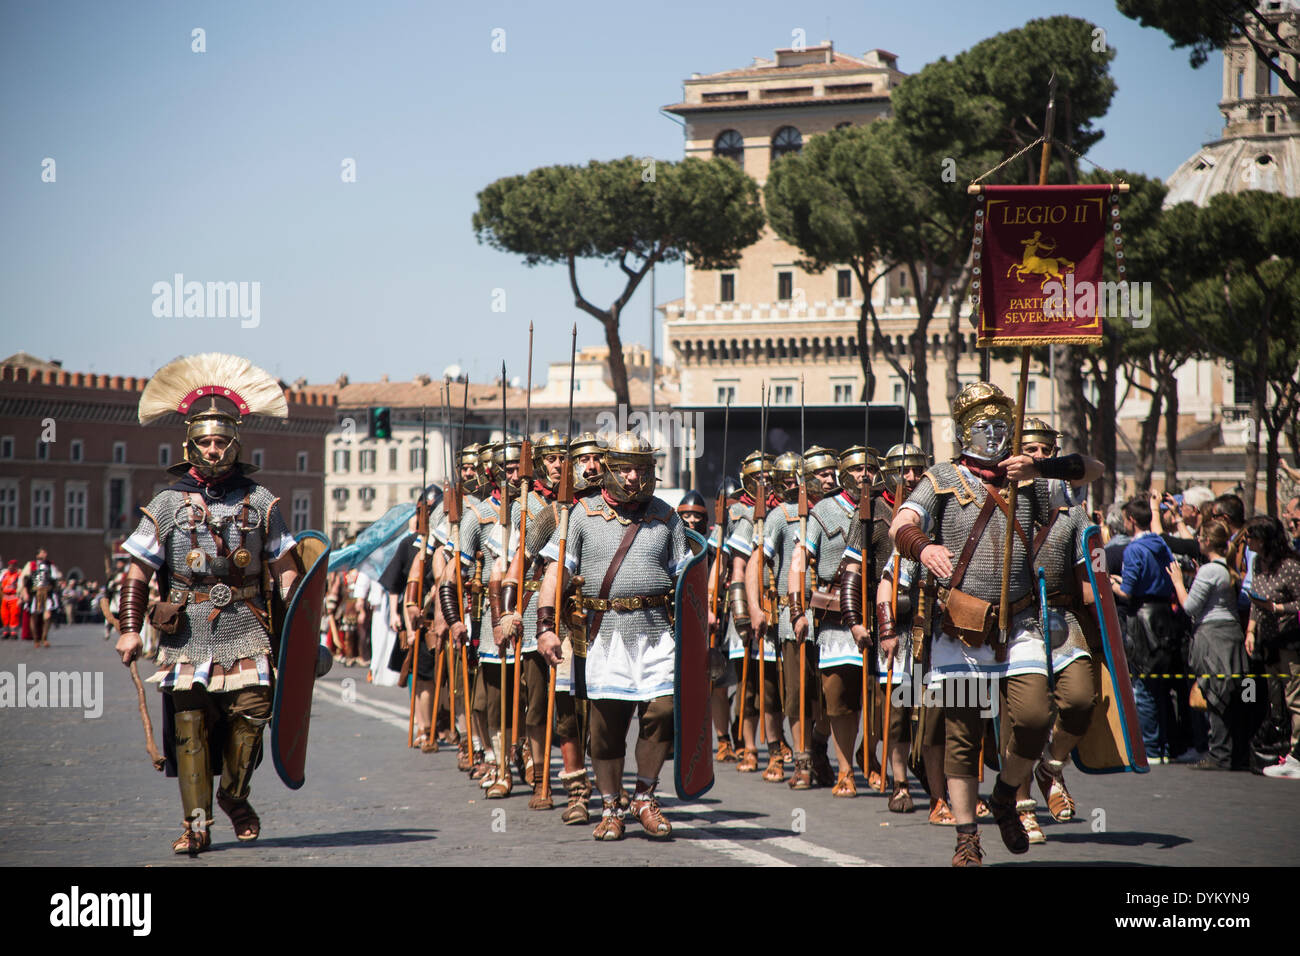 Rome, Italy. 21st April 2014. Birthday of Rome is the biggest european